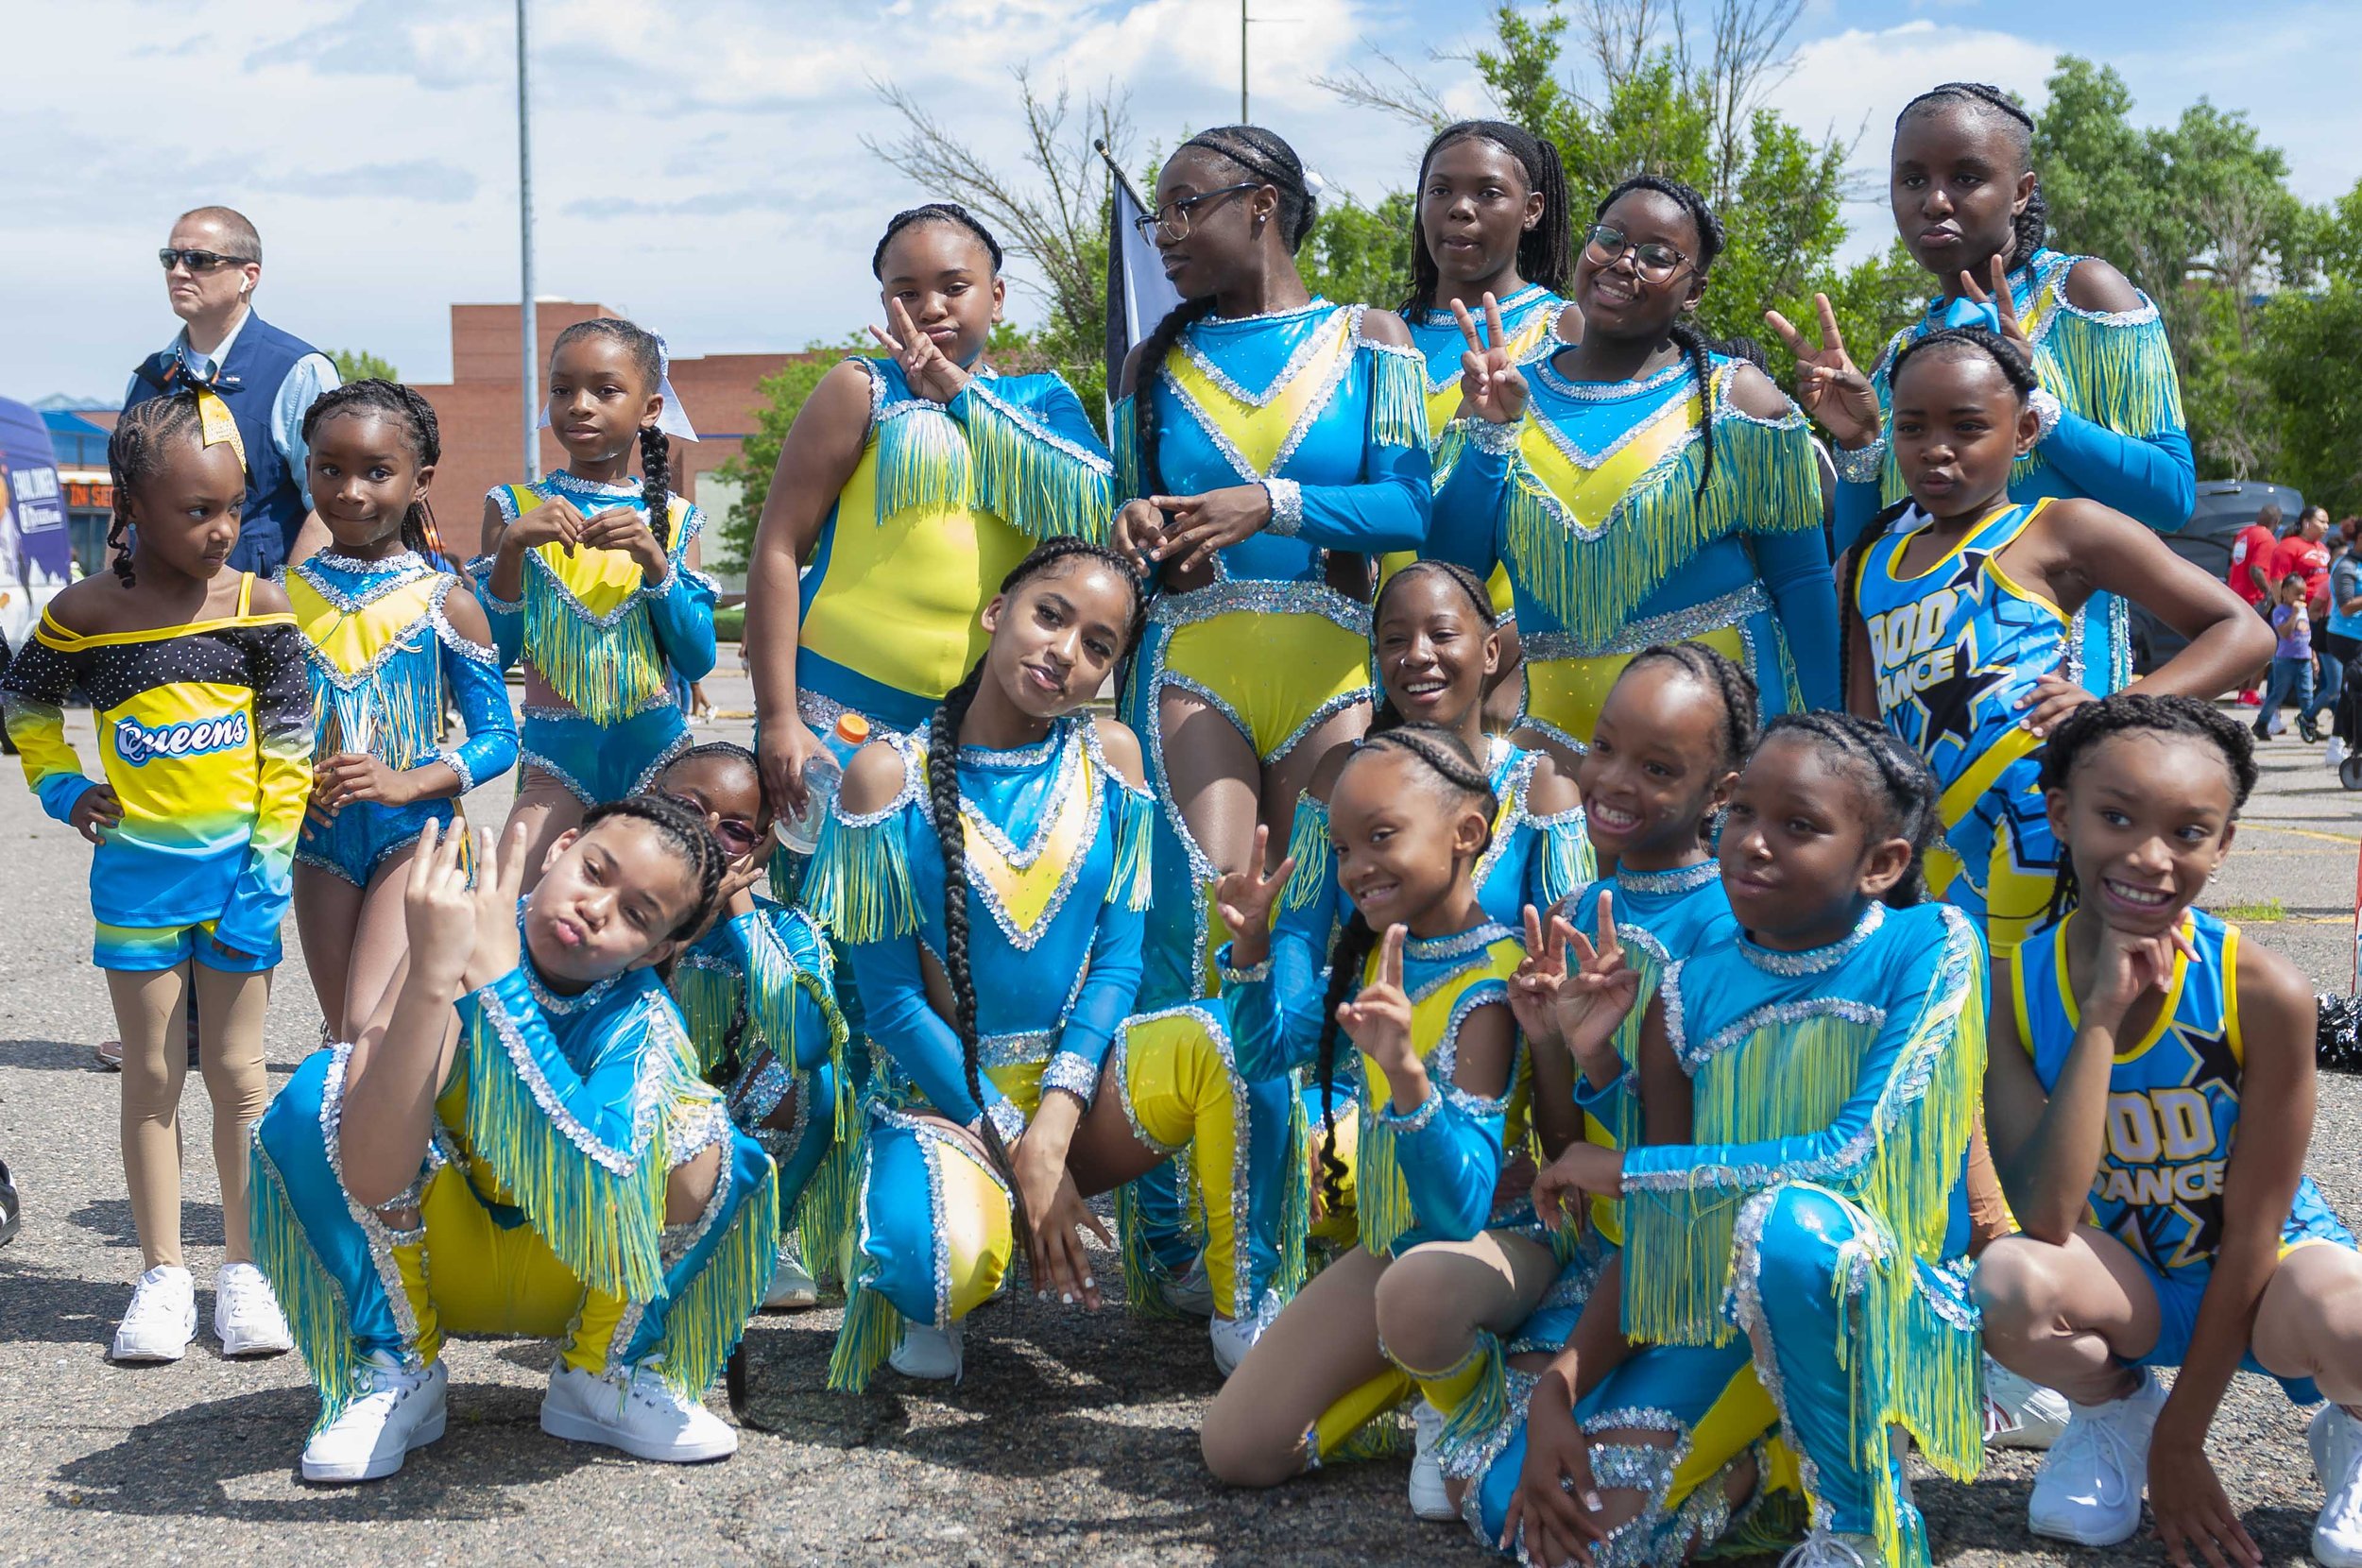   Queens of Kings of Dynasty Dance troupe pose before getting ready for the parade.  